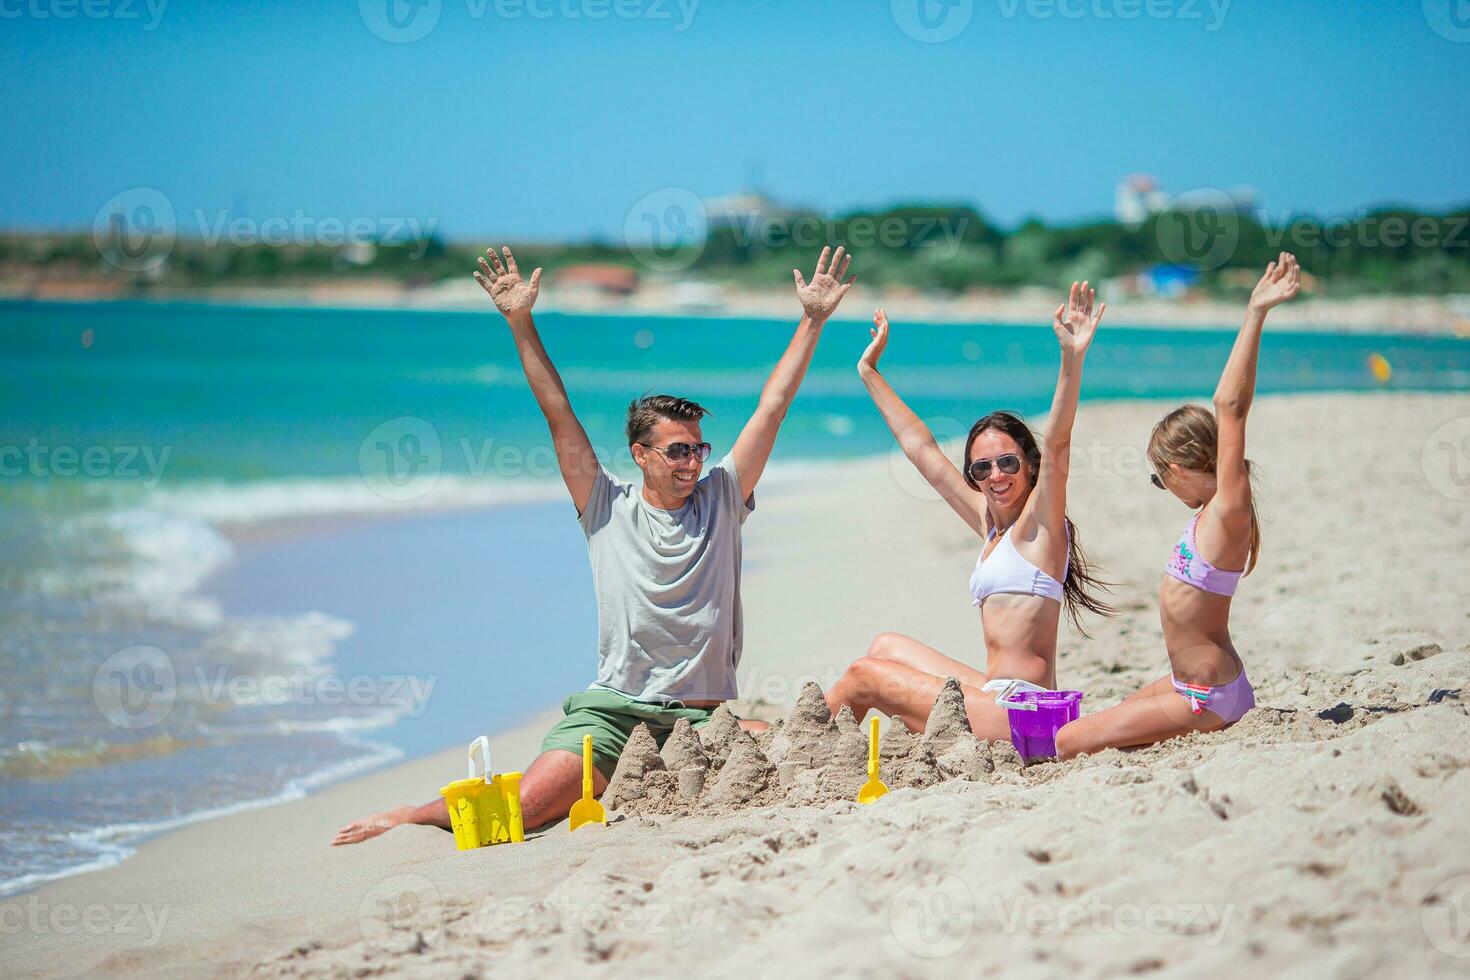 Family enjoying time on the beach making sand castle together on the seashore photo